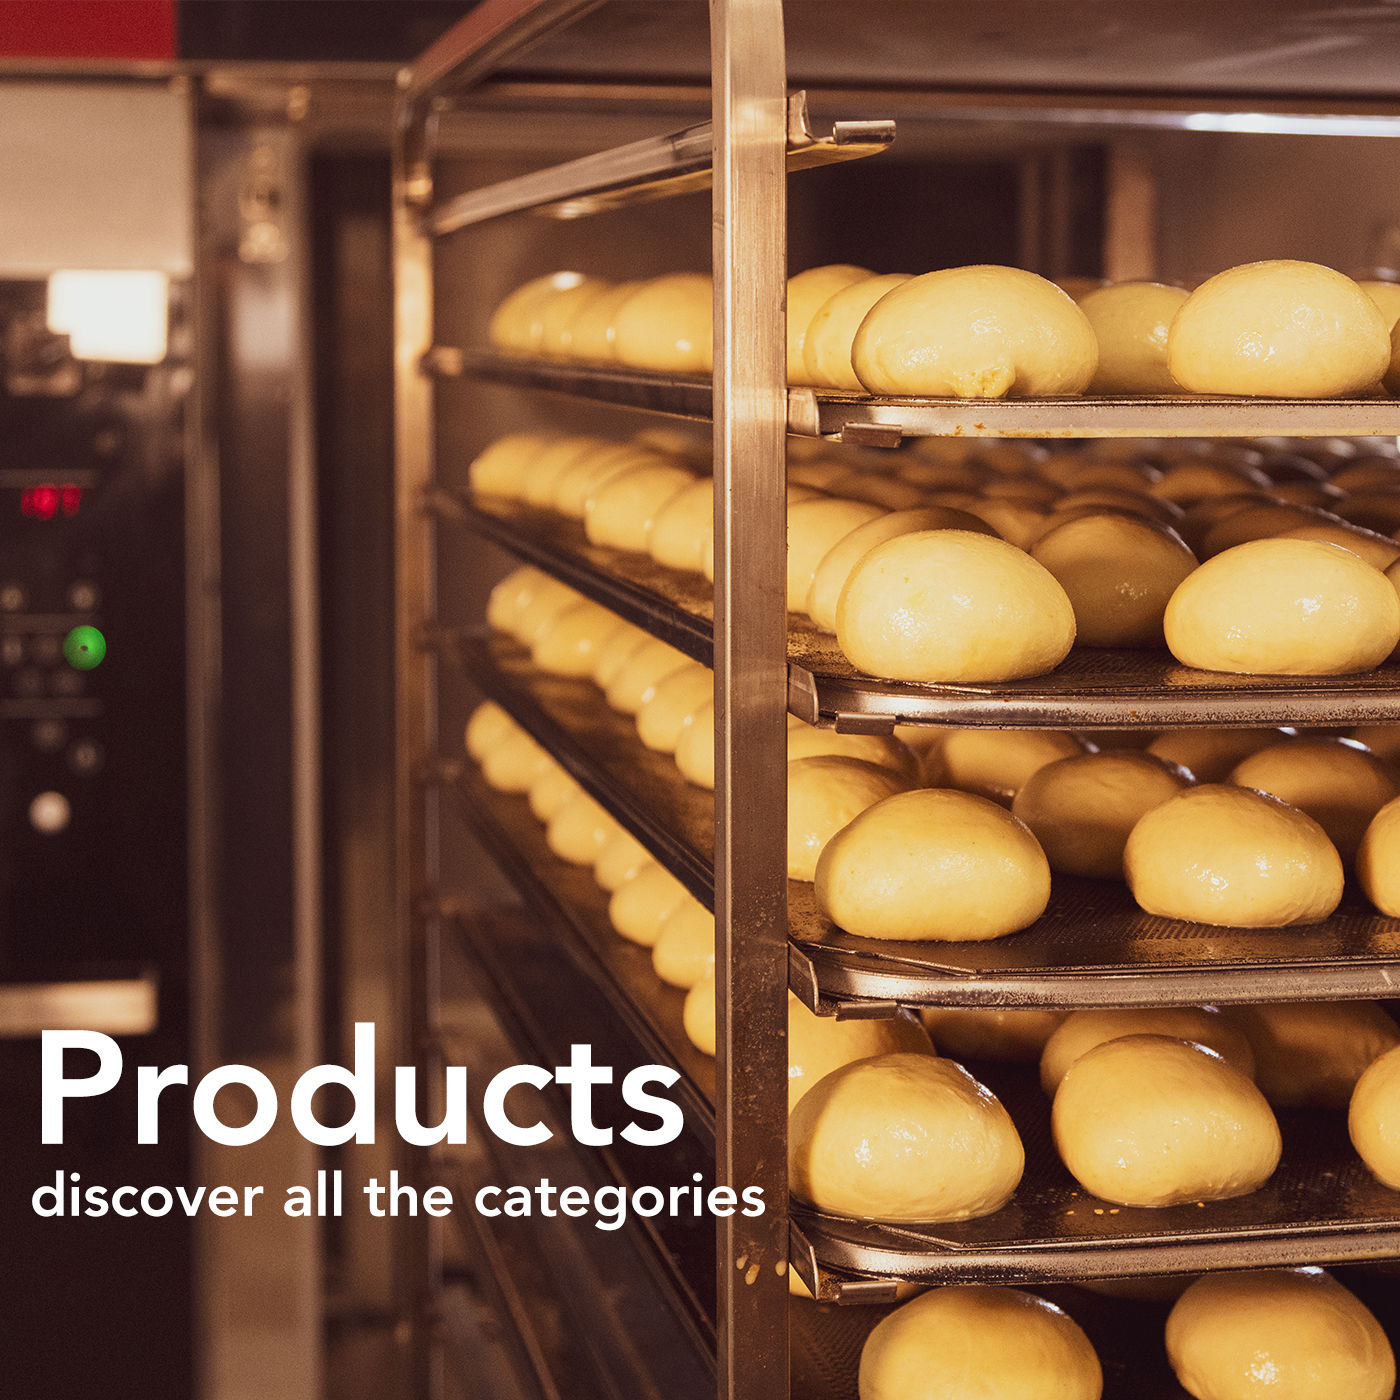 Products - discover all the categories